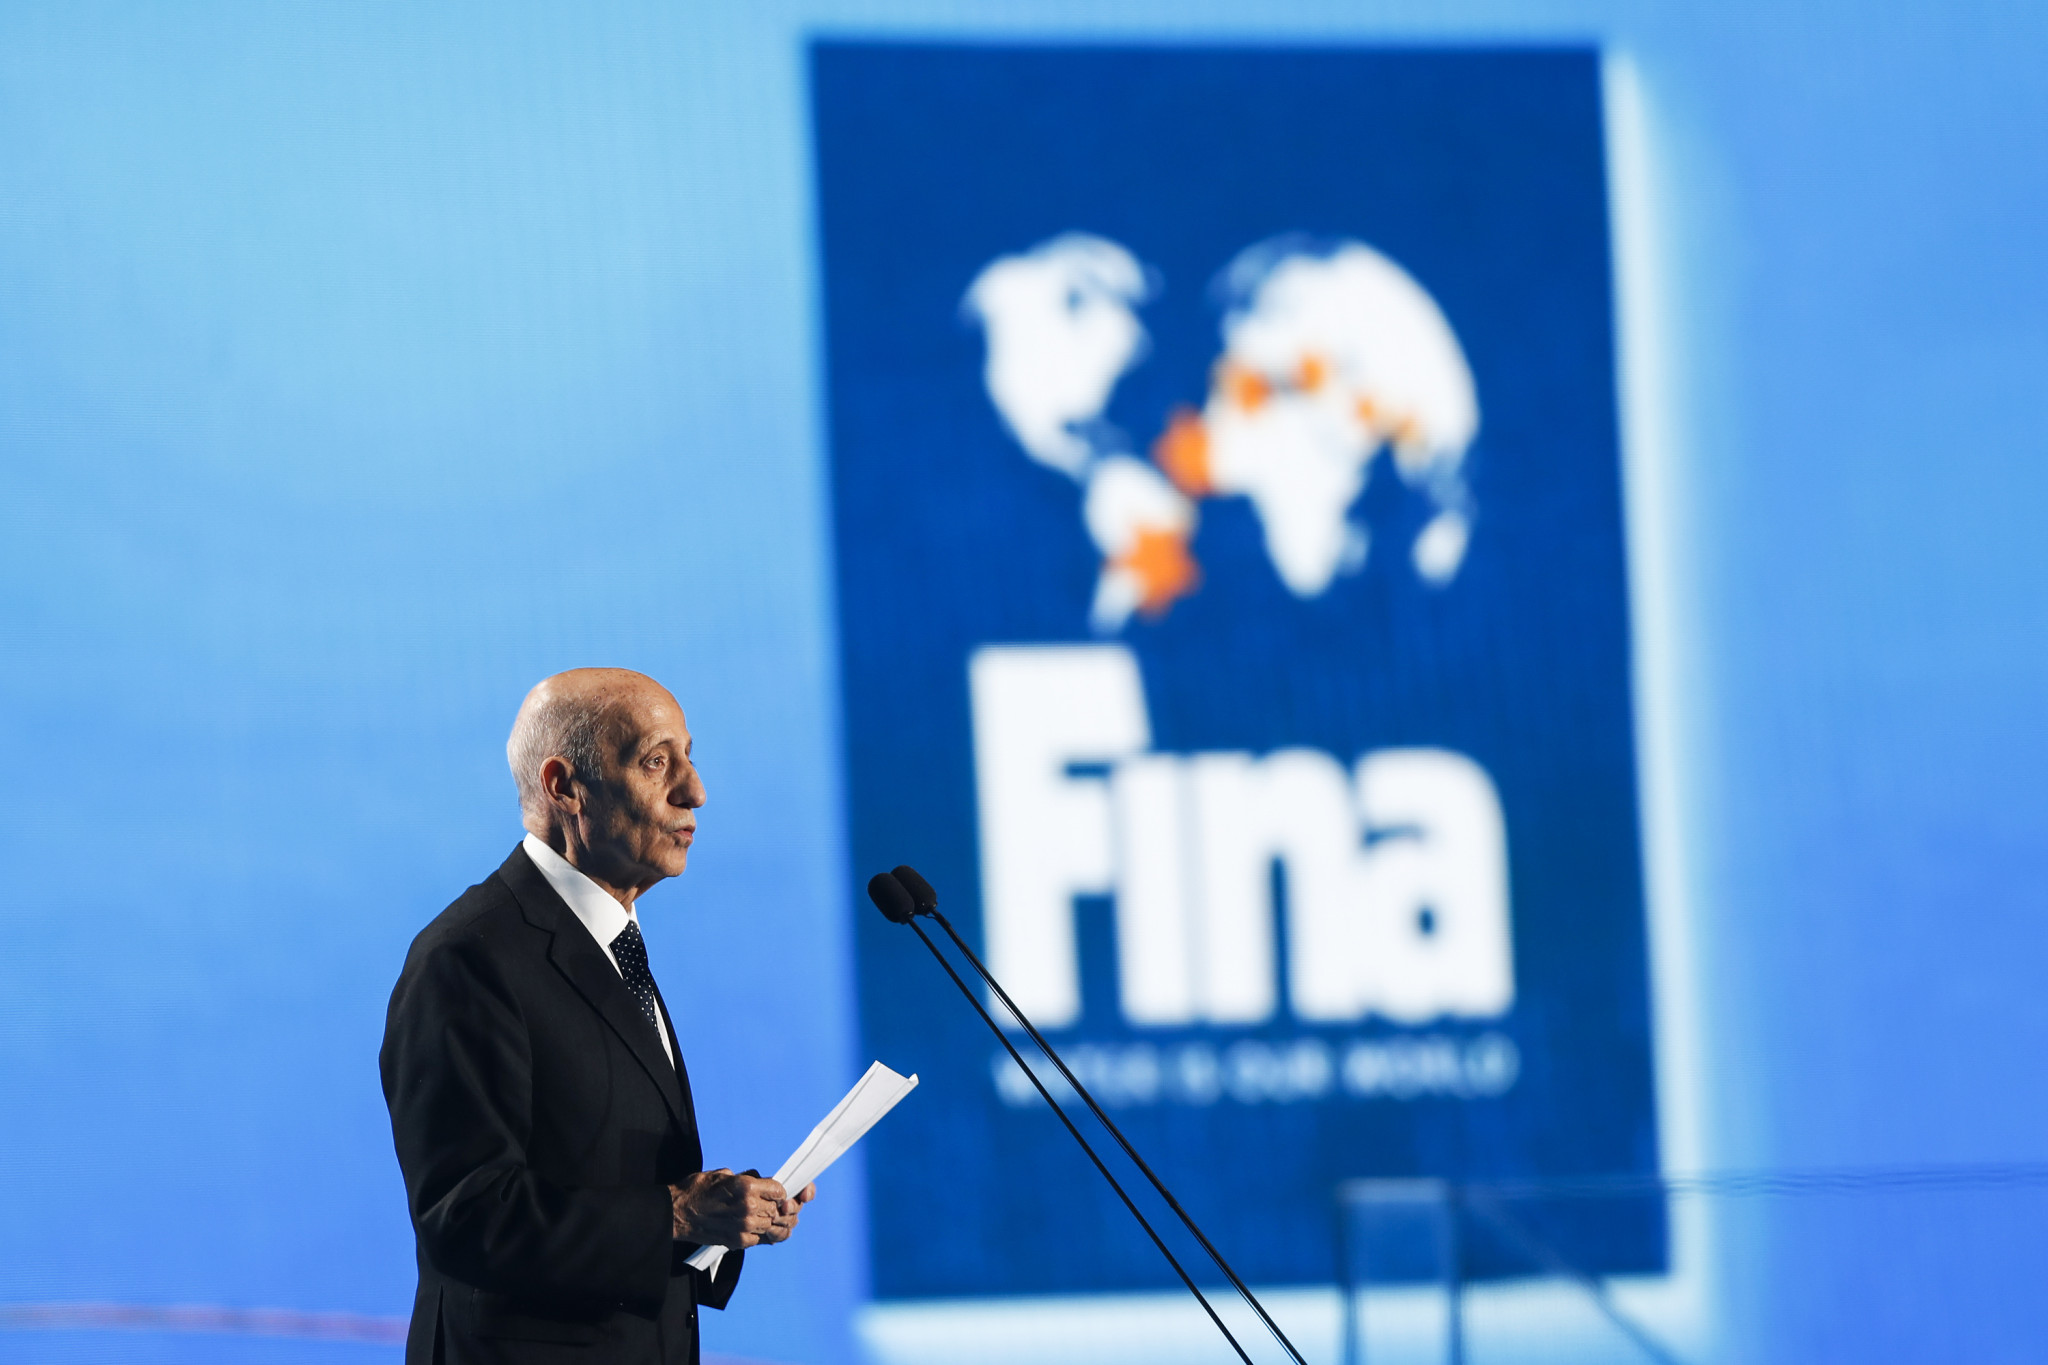 Maglione set to remain on FINA Executive after end of term as President